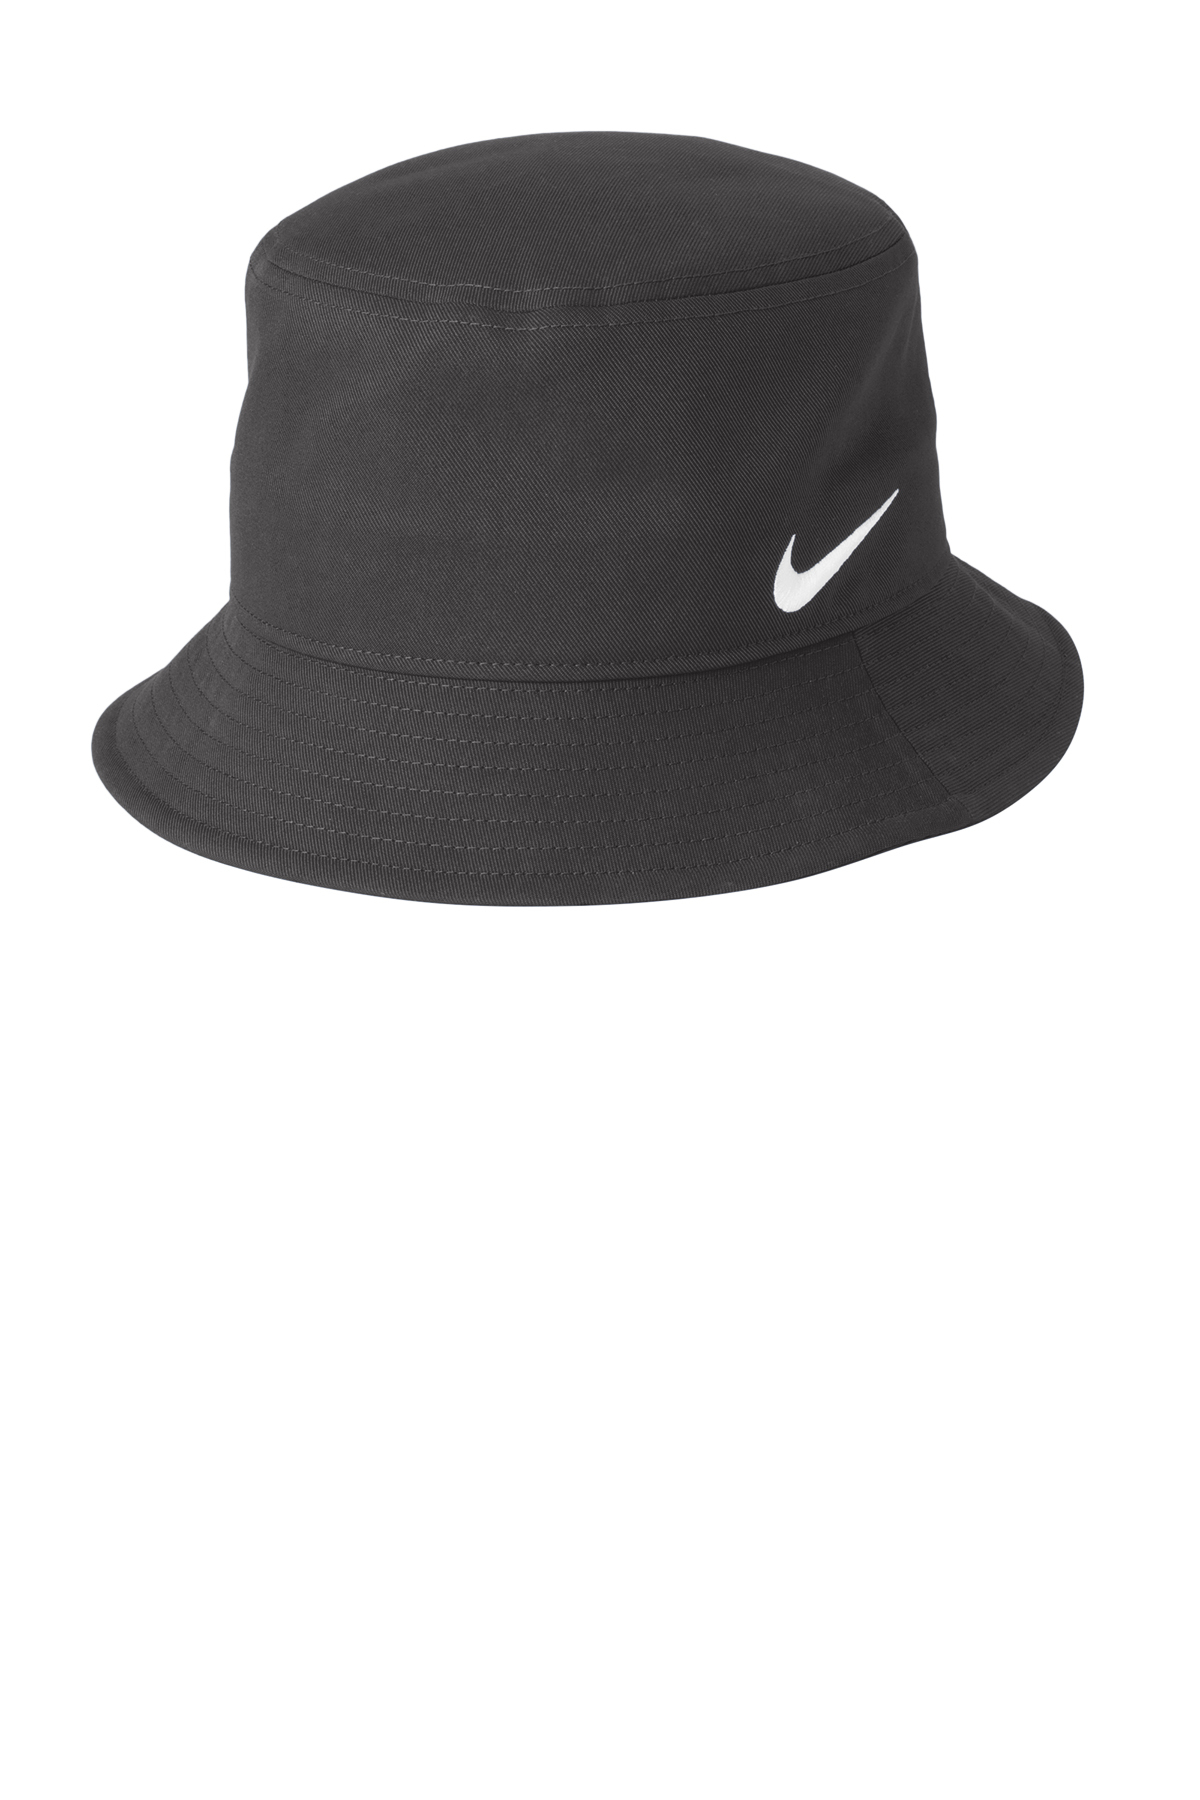 Nike Swoosh Bucket Hat | Product | Company Casuals